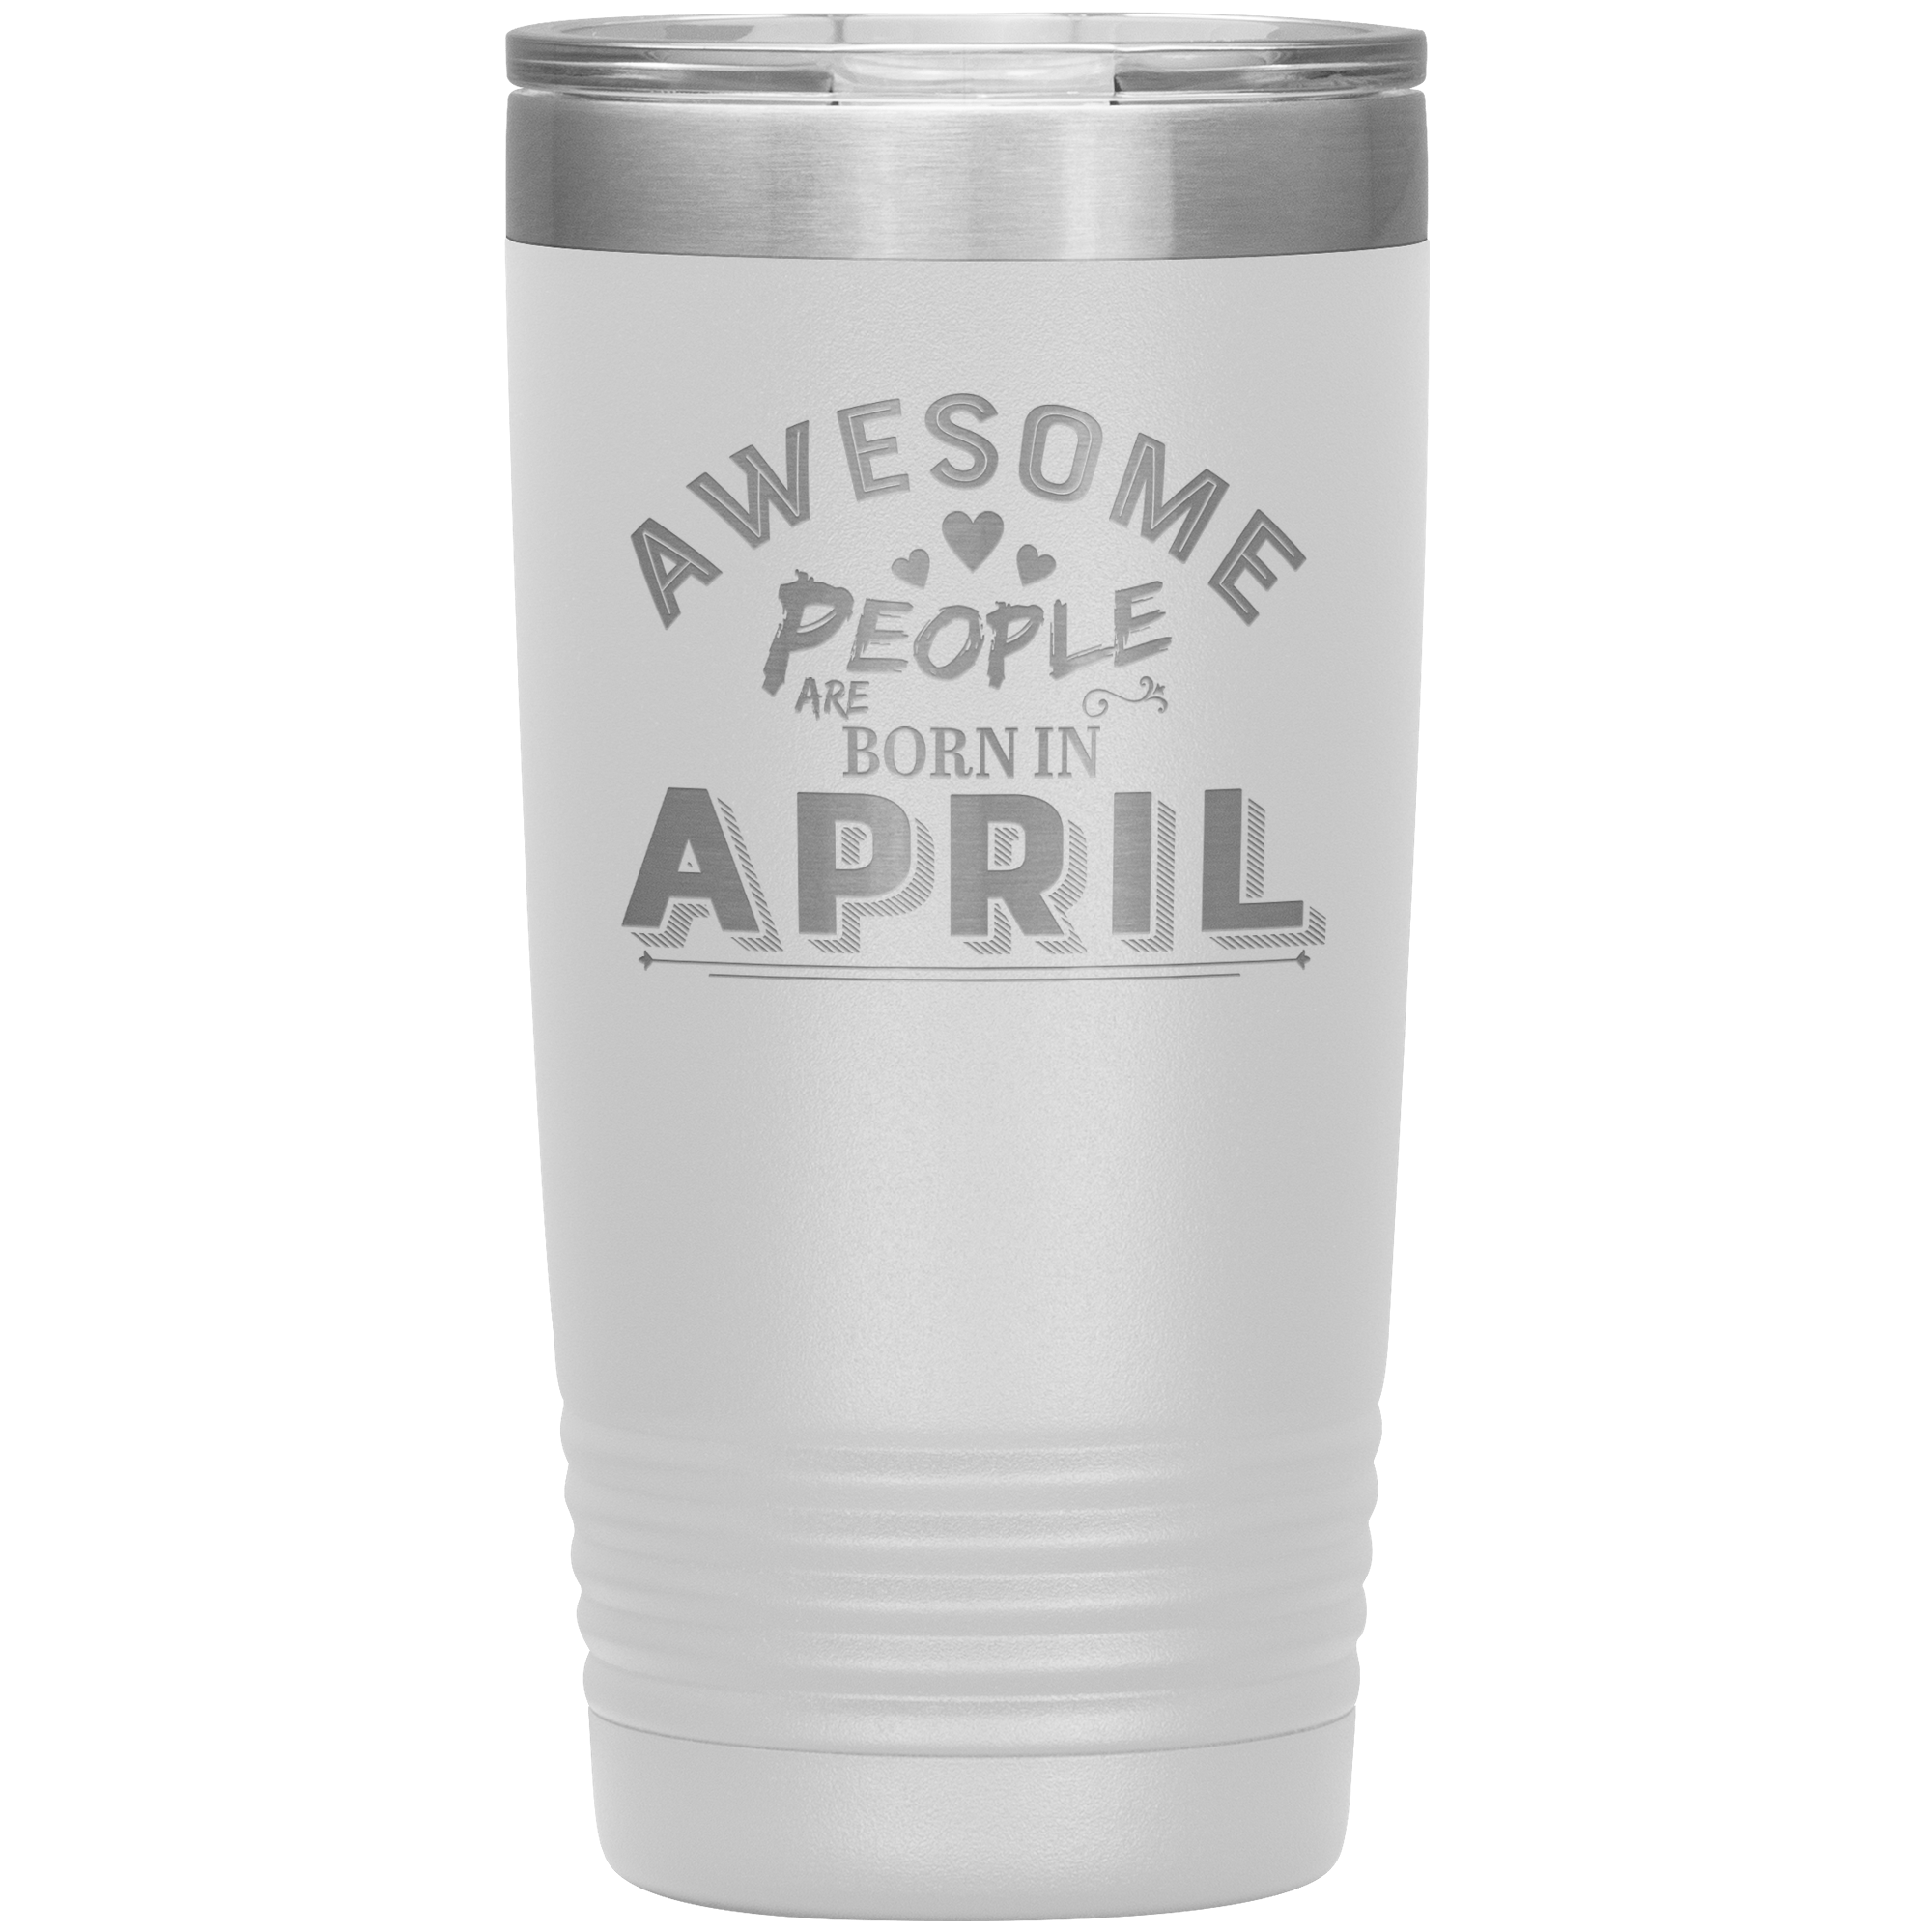 "AWESOME PEOPLE ARE BORN IN APRIL" Tumbler